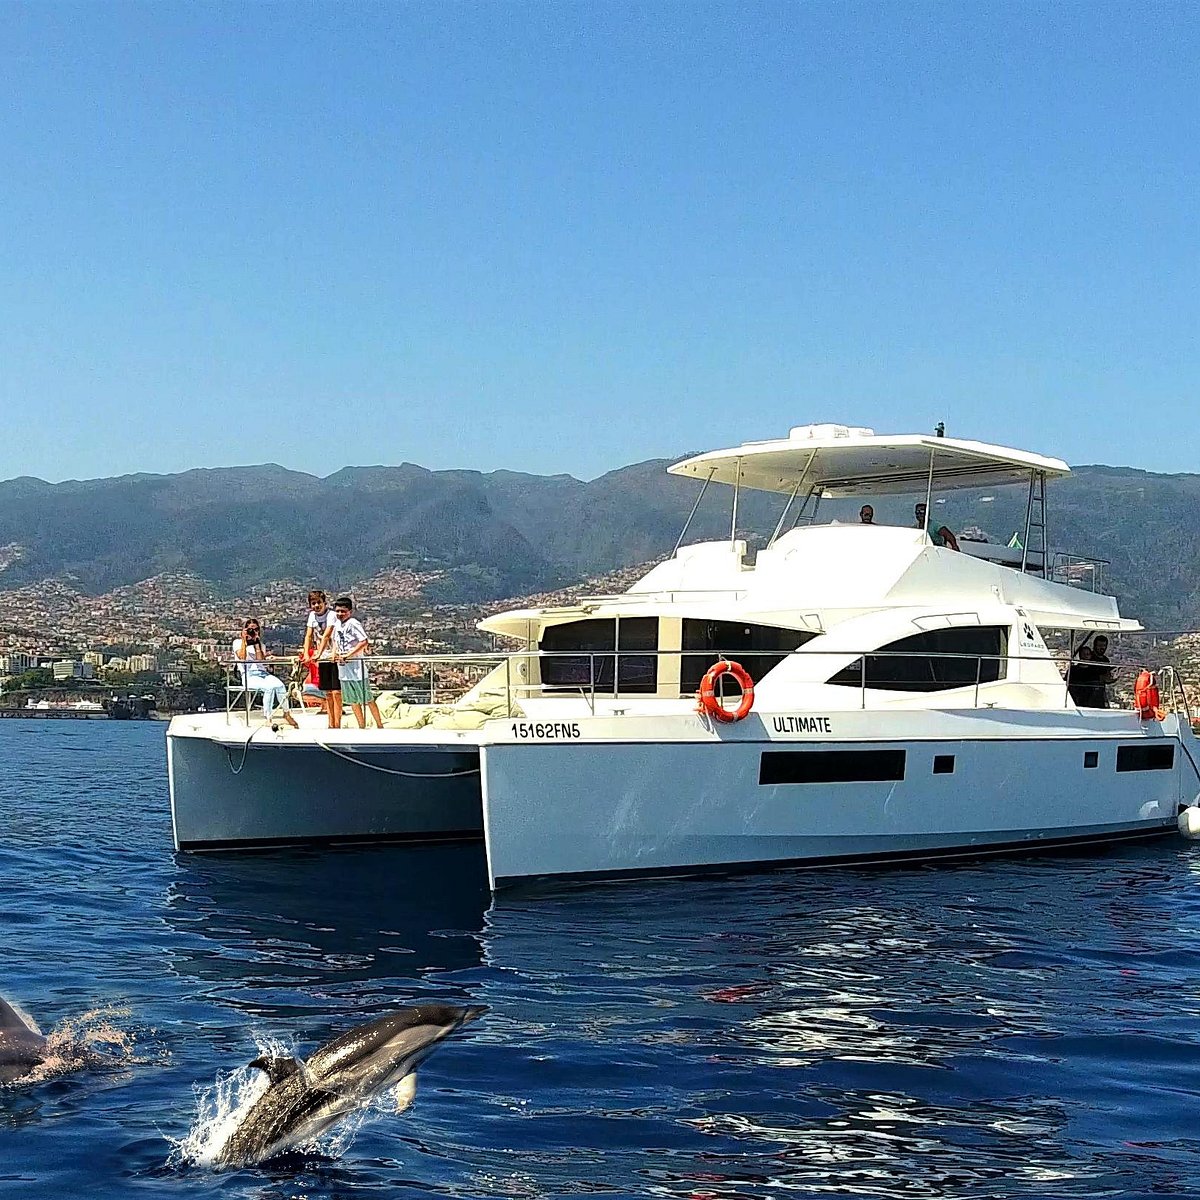 VipDolphins Luxury Whale Watching (Funchal) - All You Need to Know ...